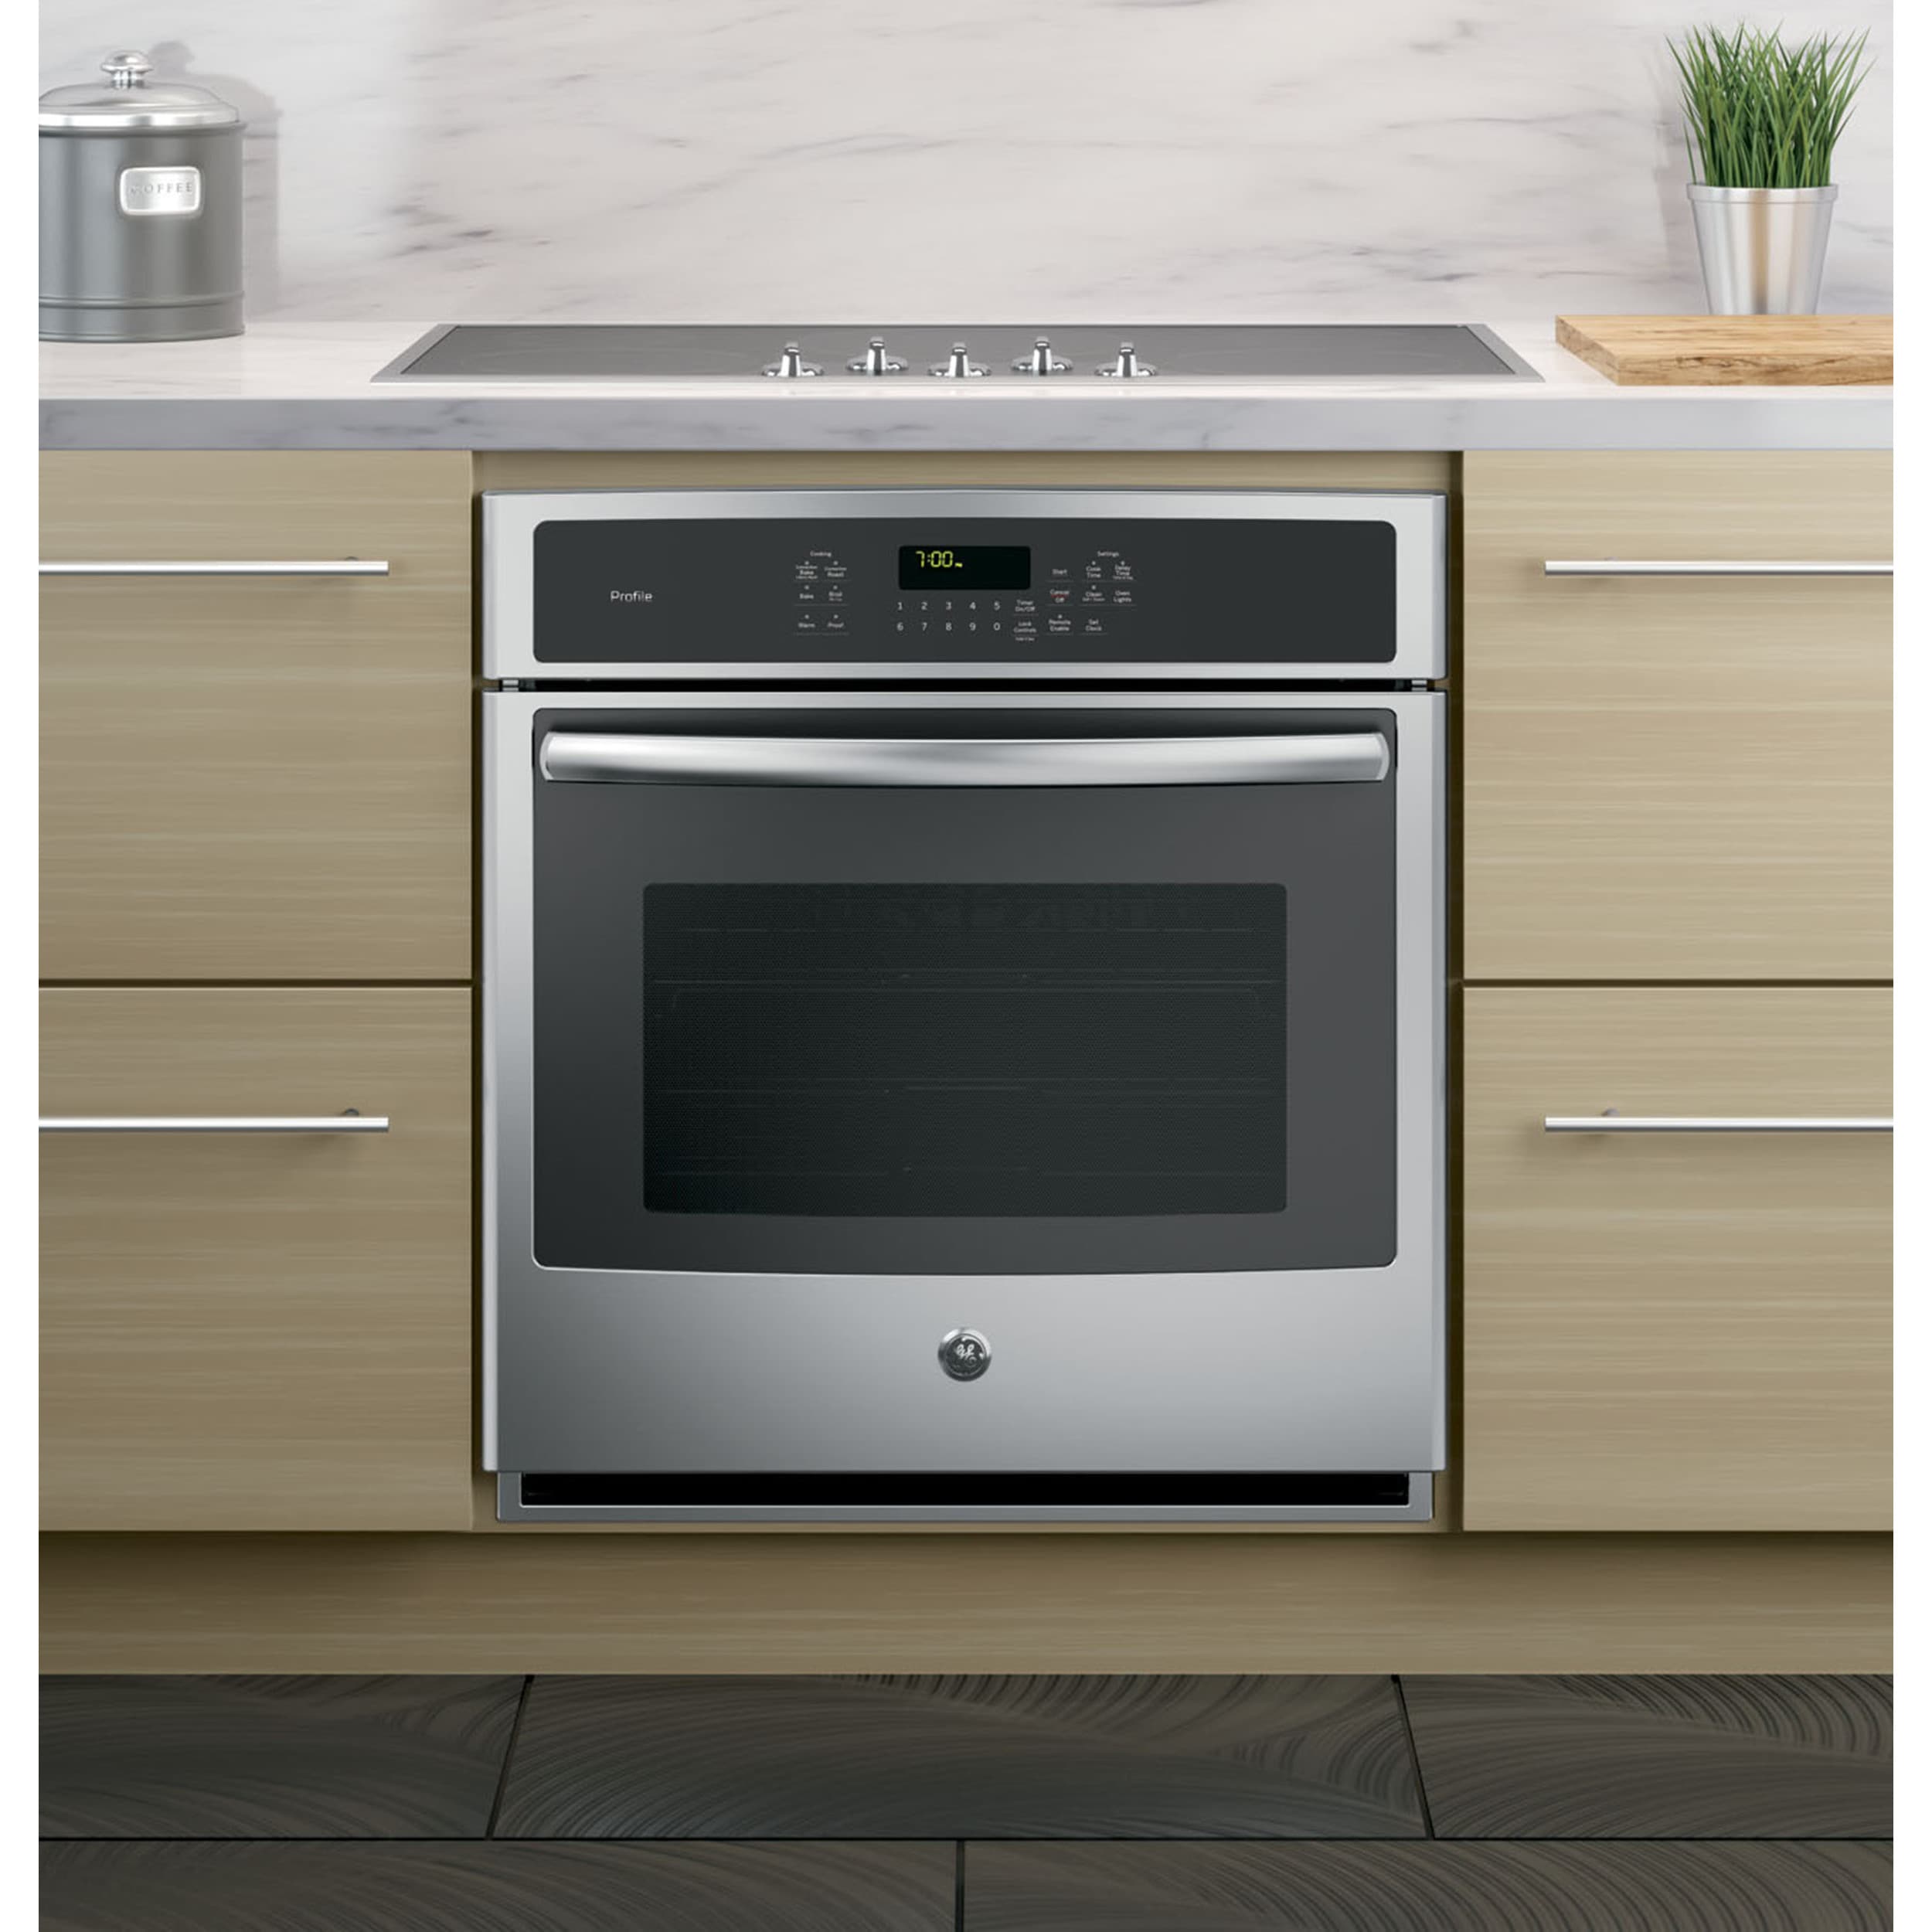 GE Profile Series 27 Inch Built In Single Convection Wall Oven 5b5befdc Fa8f 4a61 85aa 308bd53f469b 